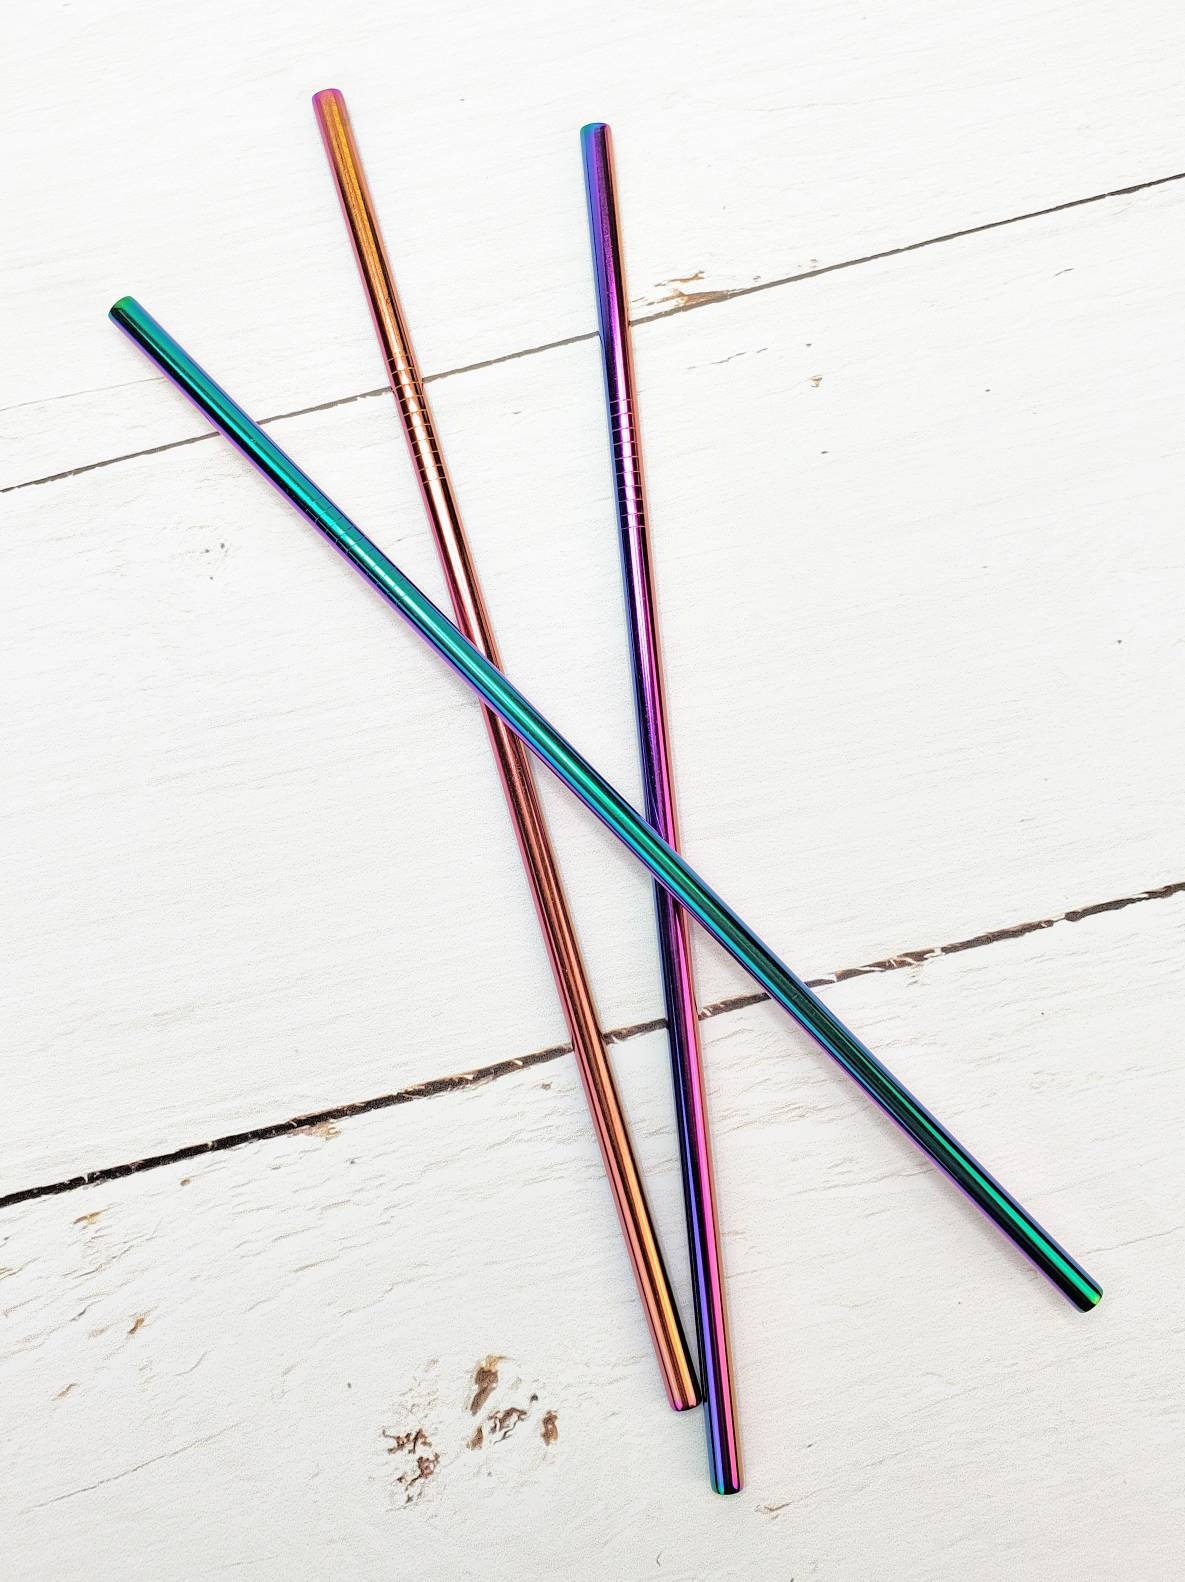 Stainless Steel Straw for Tall Skinny Tumbler - 9.5 inch reusable straw